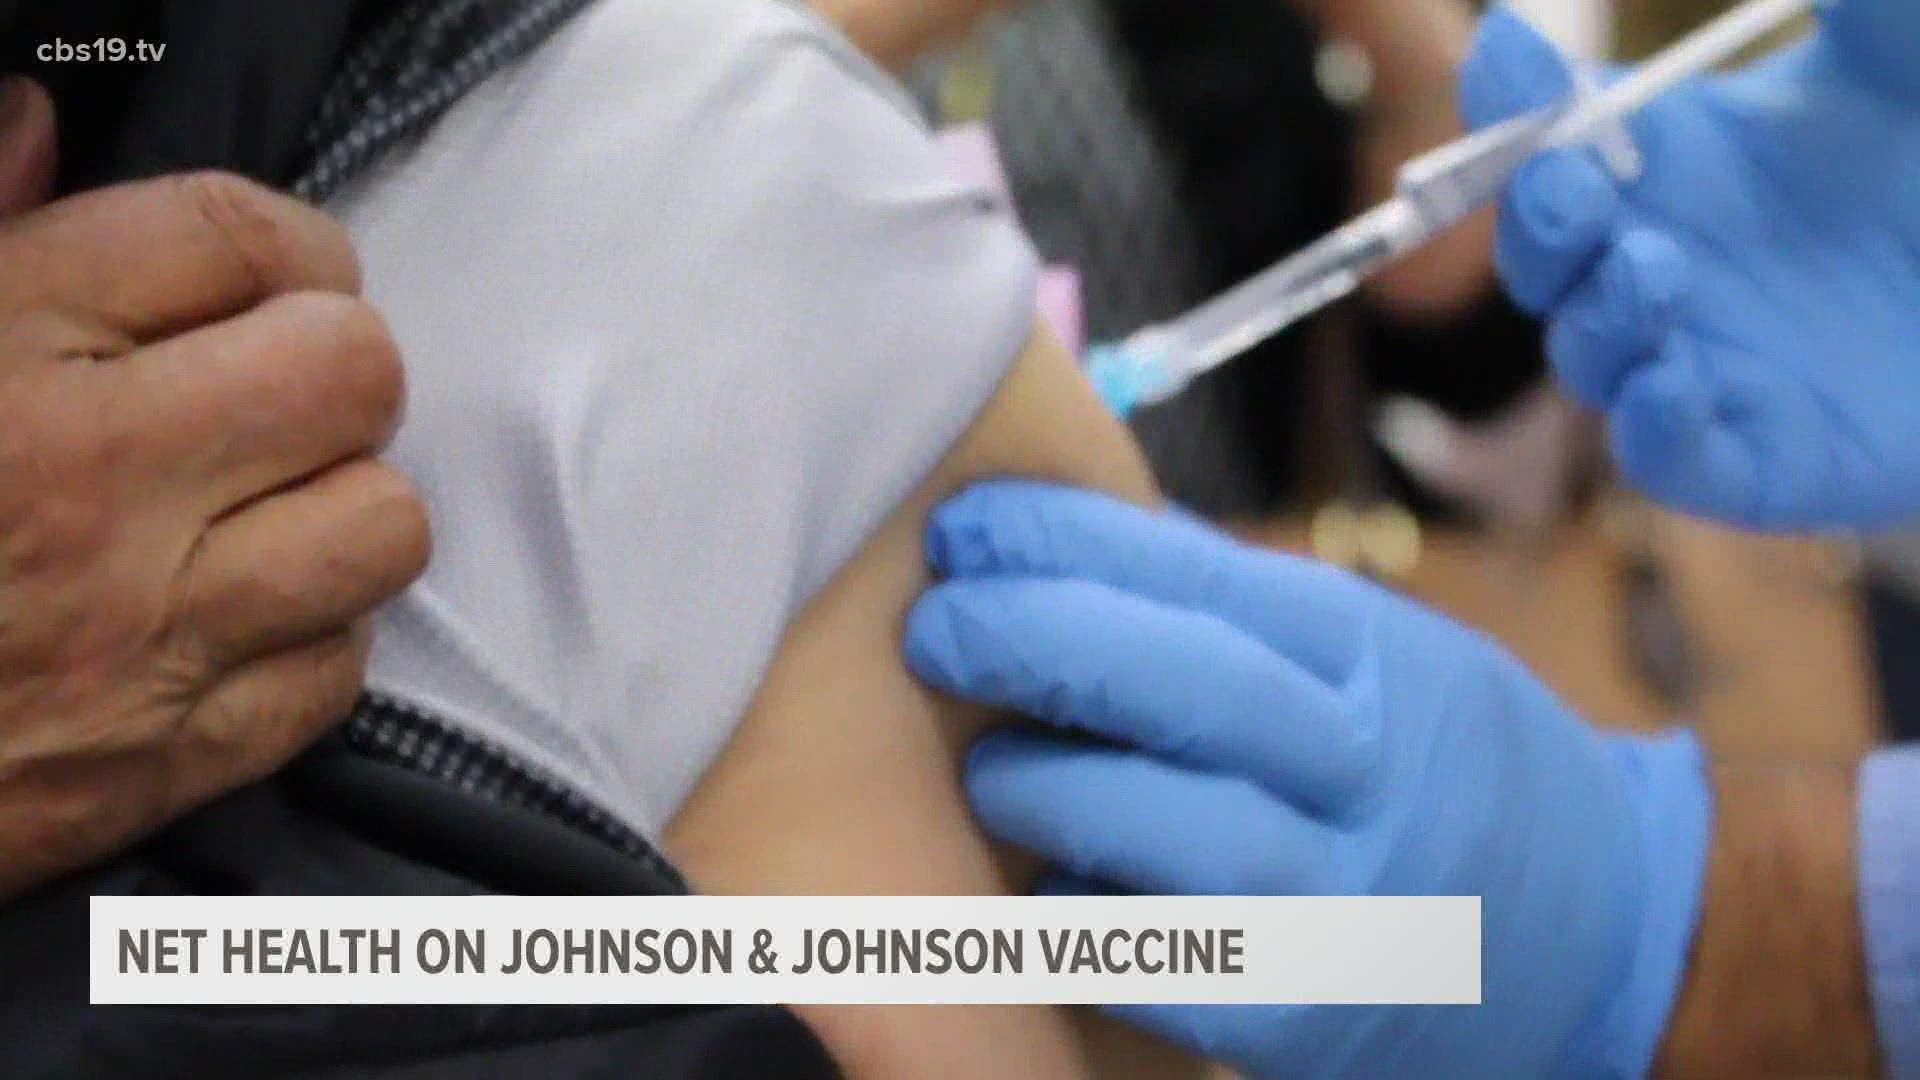 NET Health halts administration of Johnson & Johnson vaccine by recommendation of the CDC and FDA.